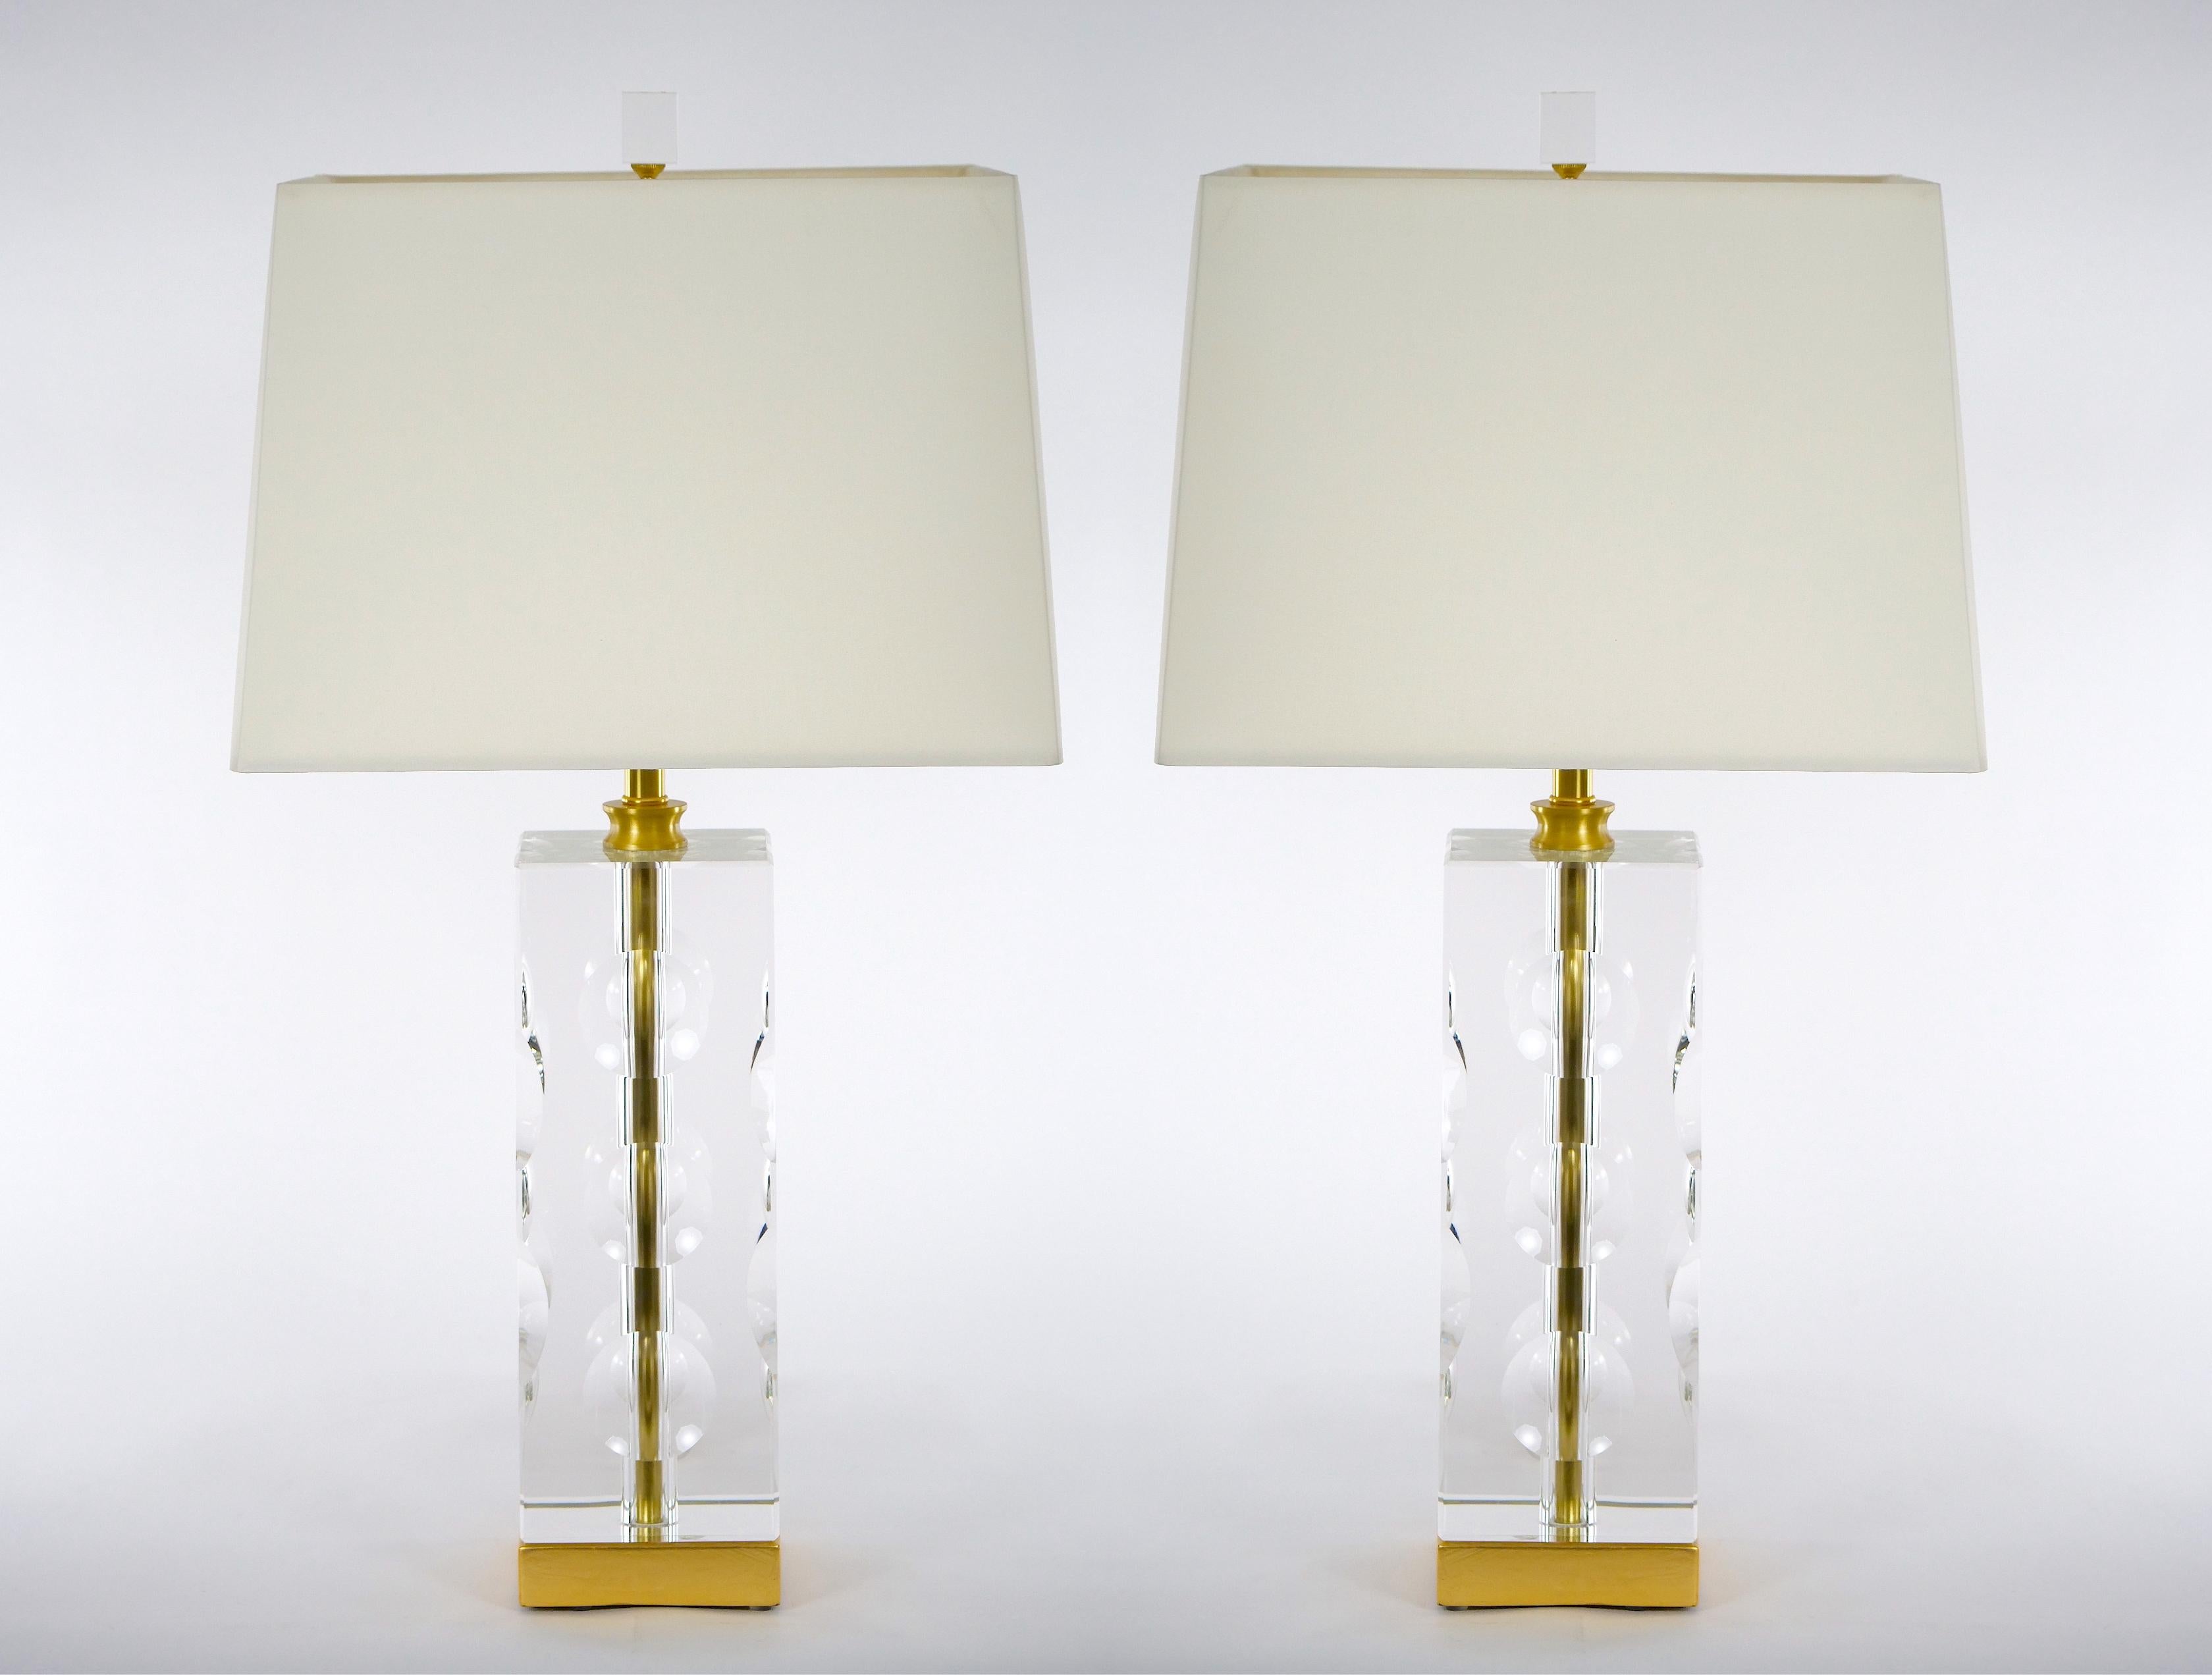 Late 20th century heavy cut glass Venetian hand cut and brass decorated details pair table lamps. Each lamp features a very deep hand cut crystal in an architectural squared column shape resting on a gilt gold base. Each lamp is in great working